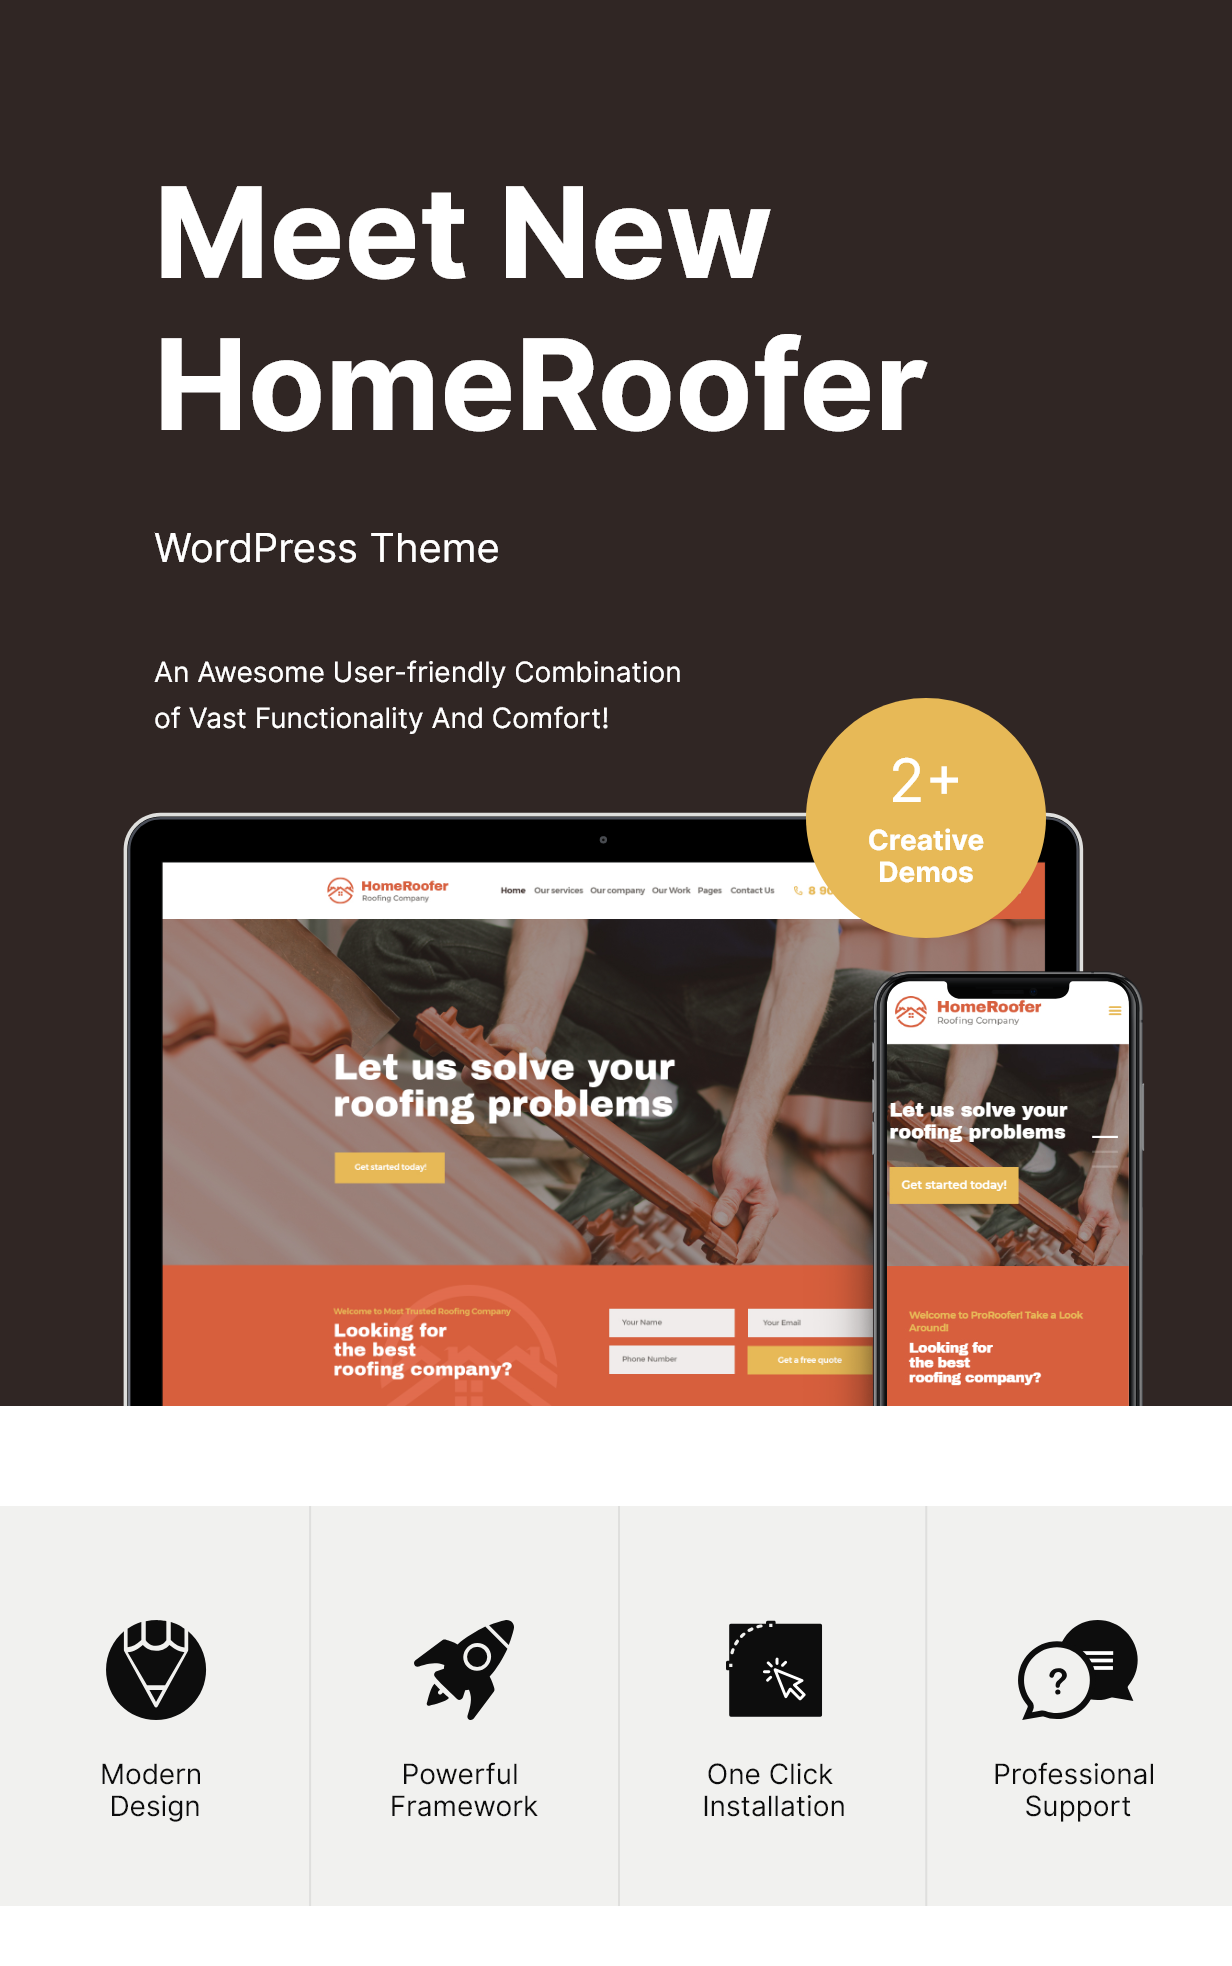 Roofing Company Services & Construction WordPress Theme Features